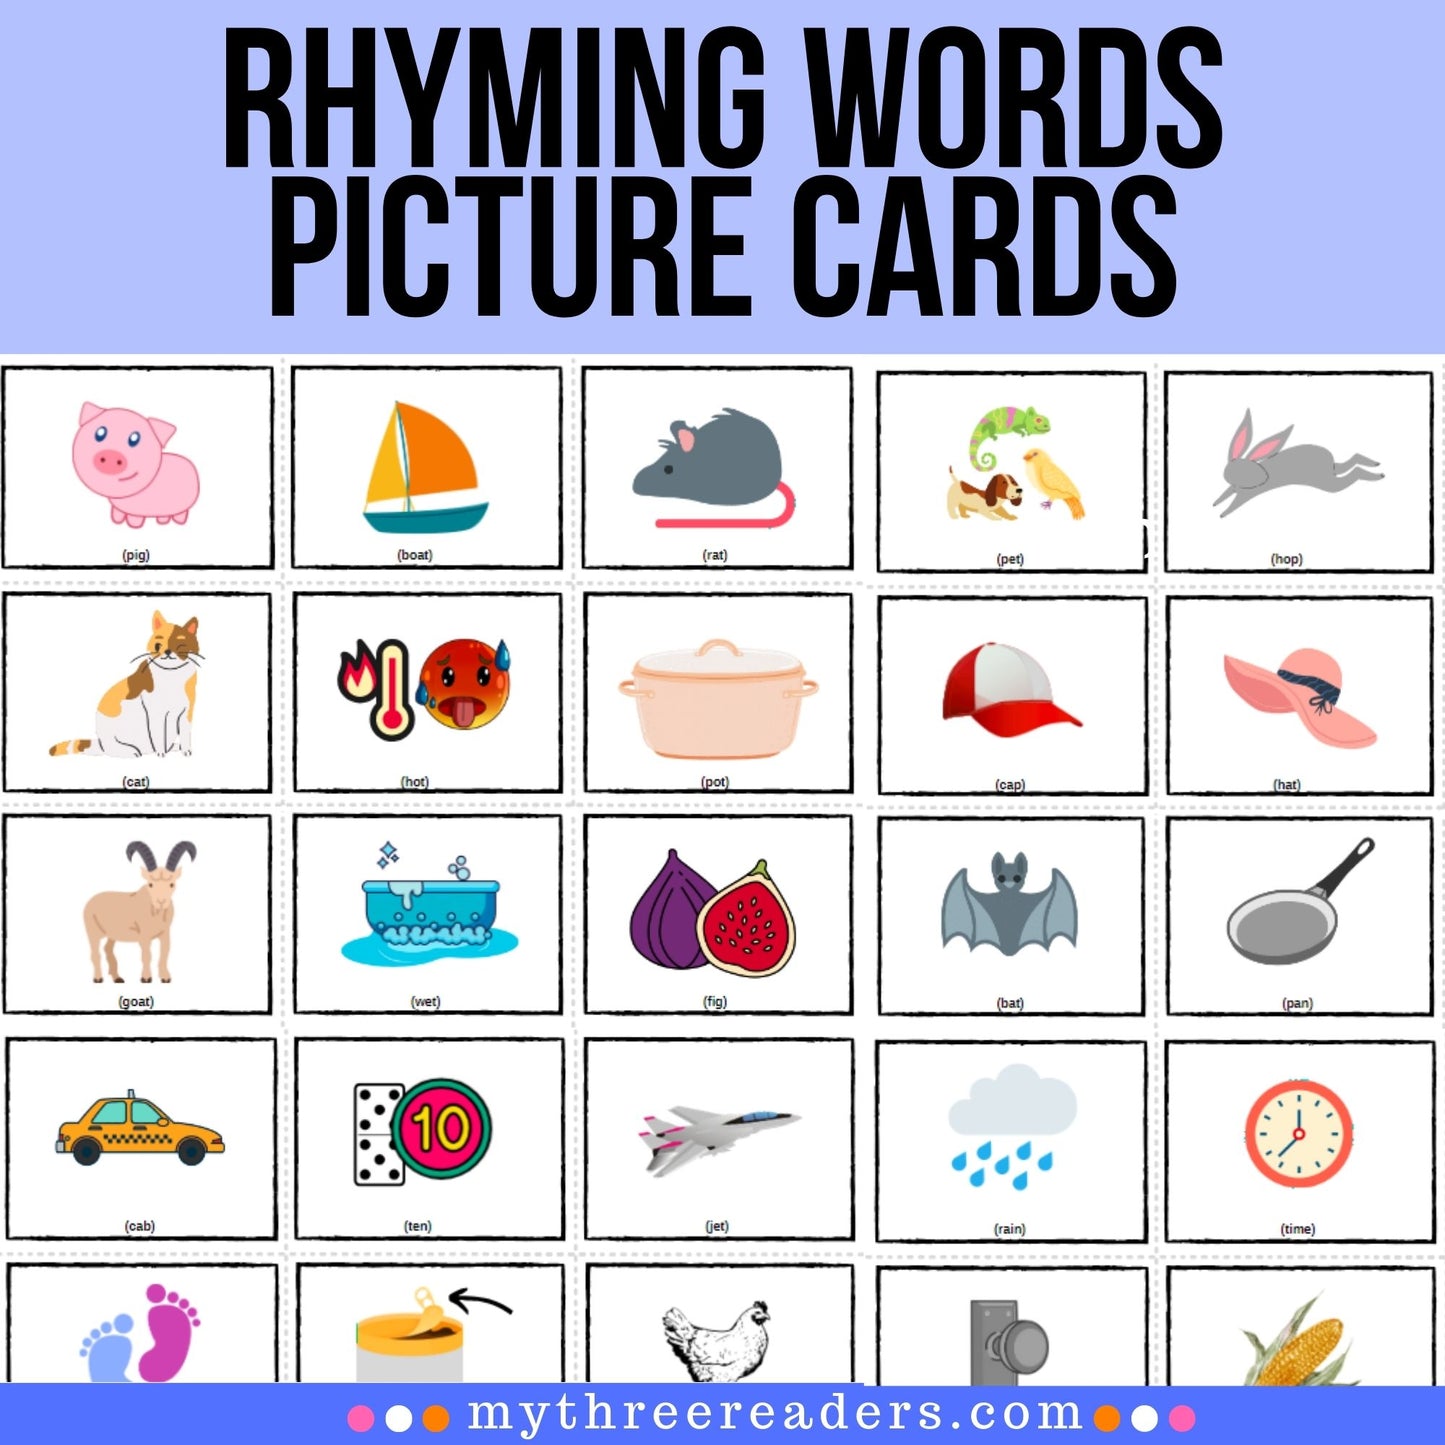 Rhyming Words Picture Cards